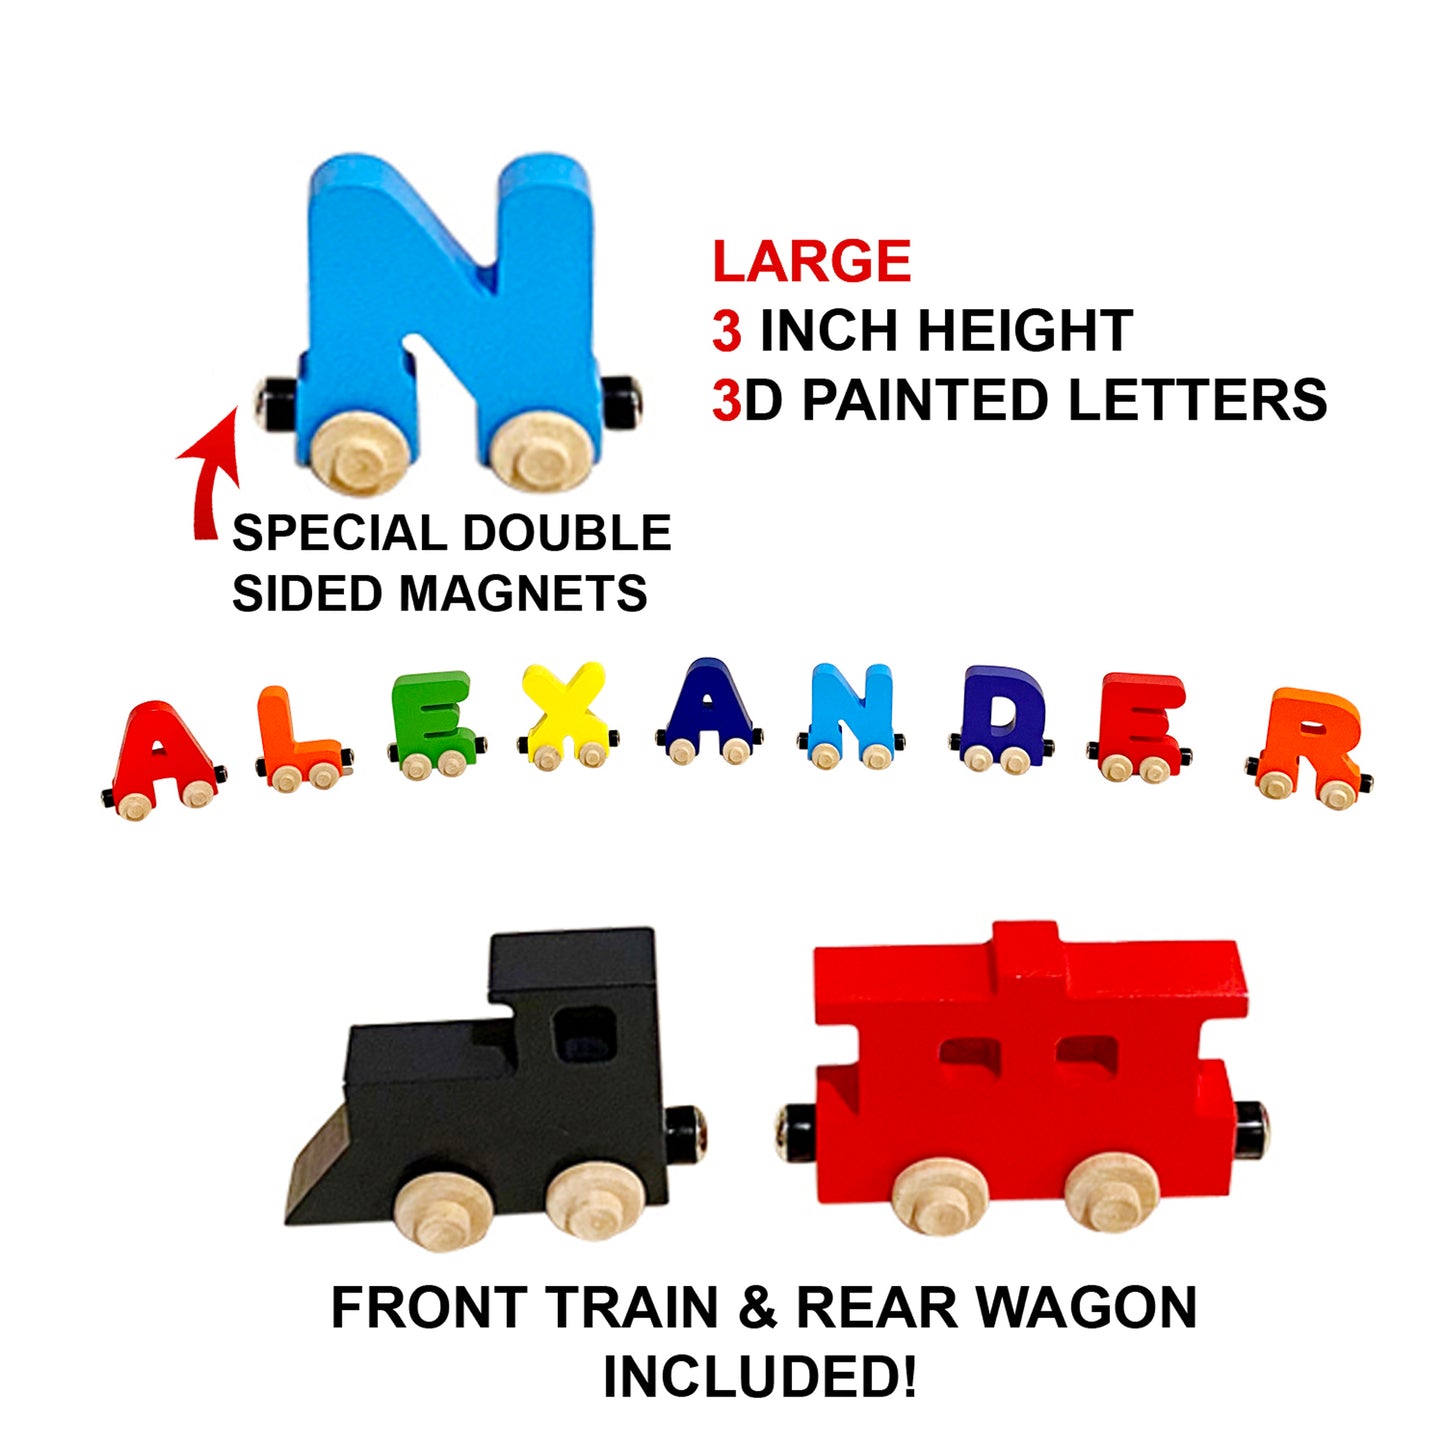 Build a Toy Train Puzzle Letter Train Name Railroad Puzzle For Kids Educational Toy